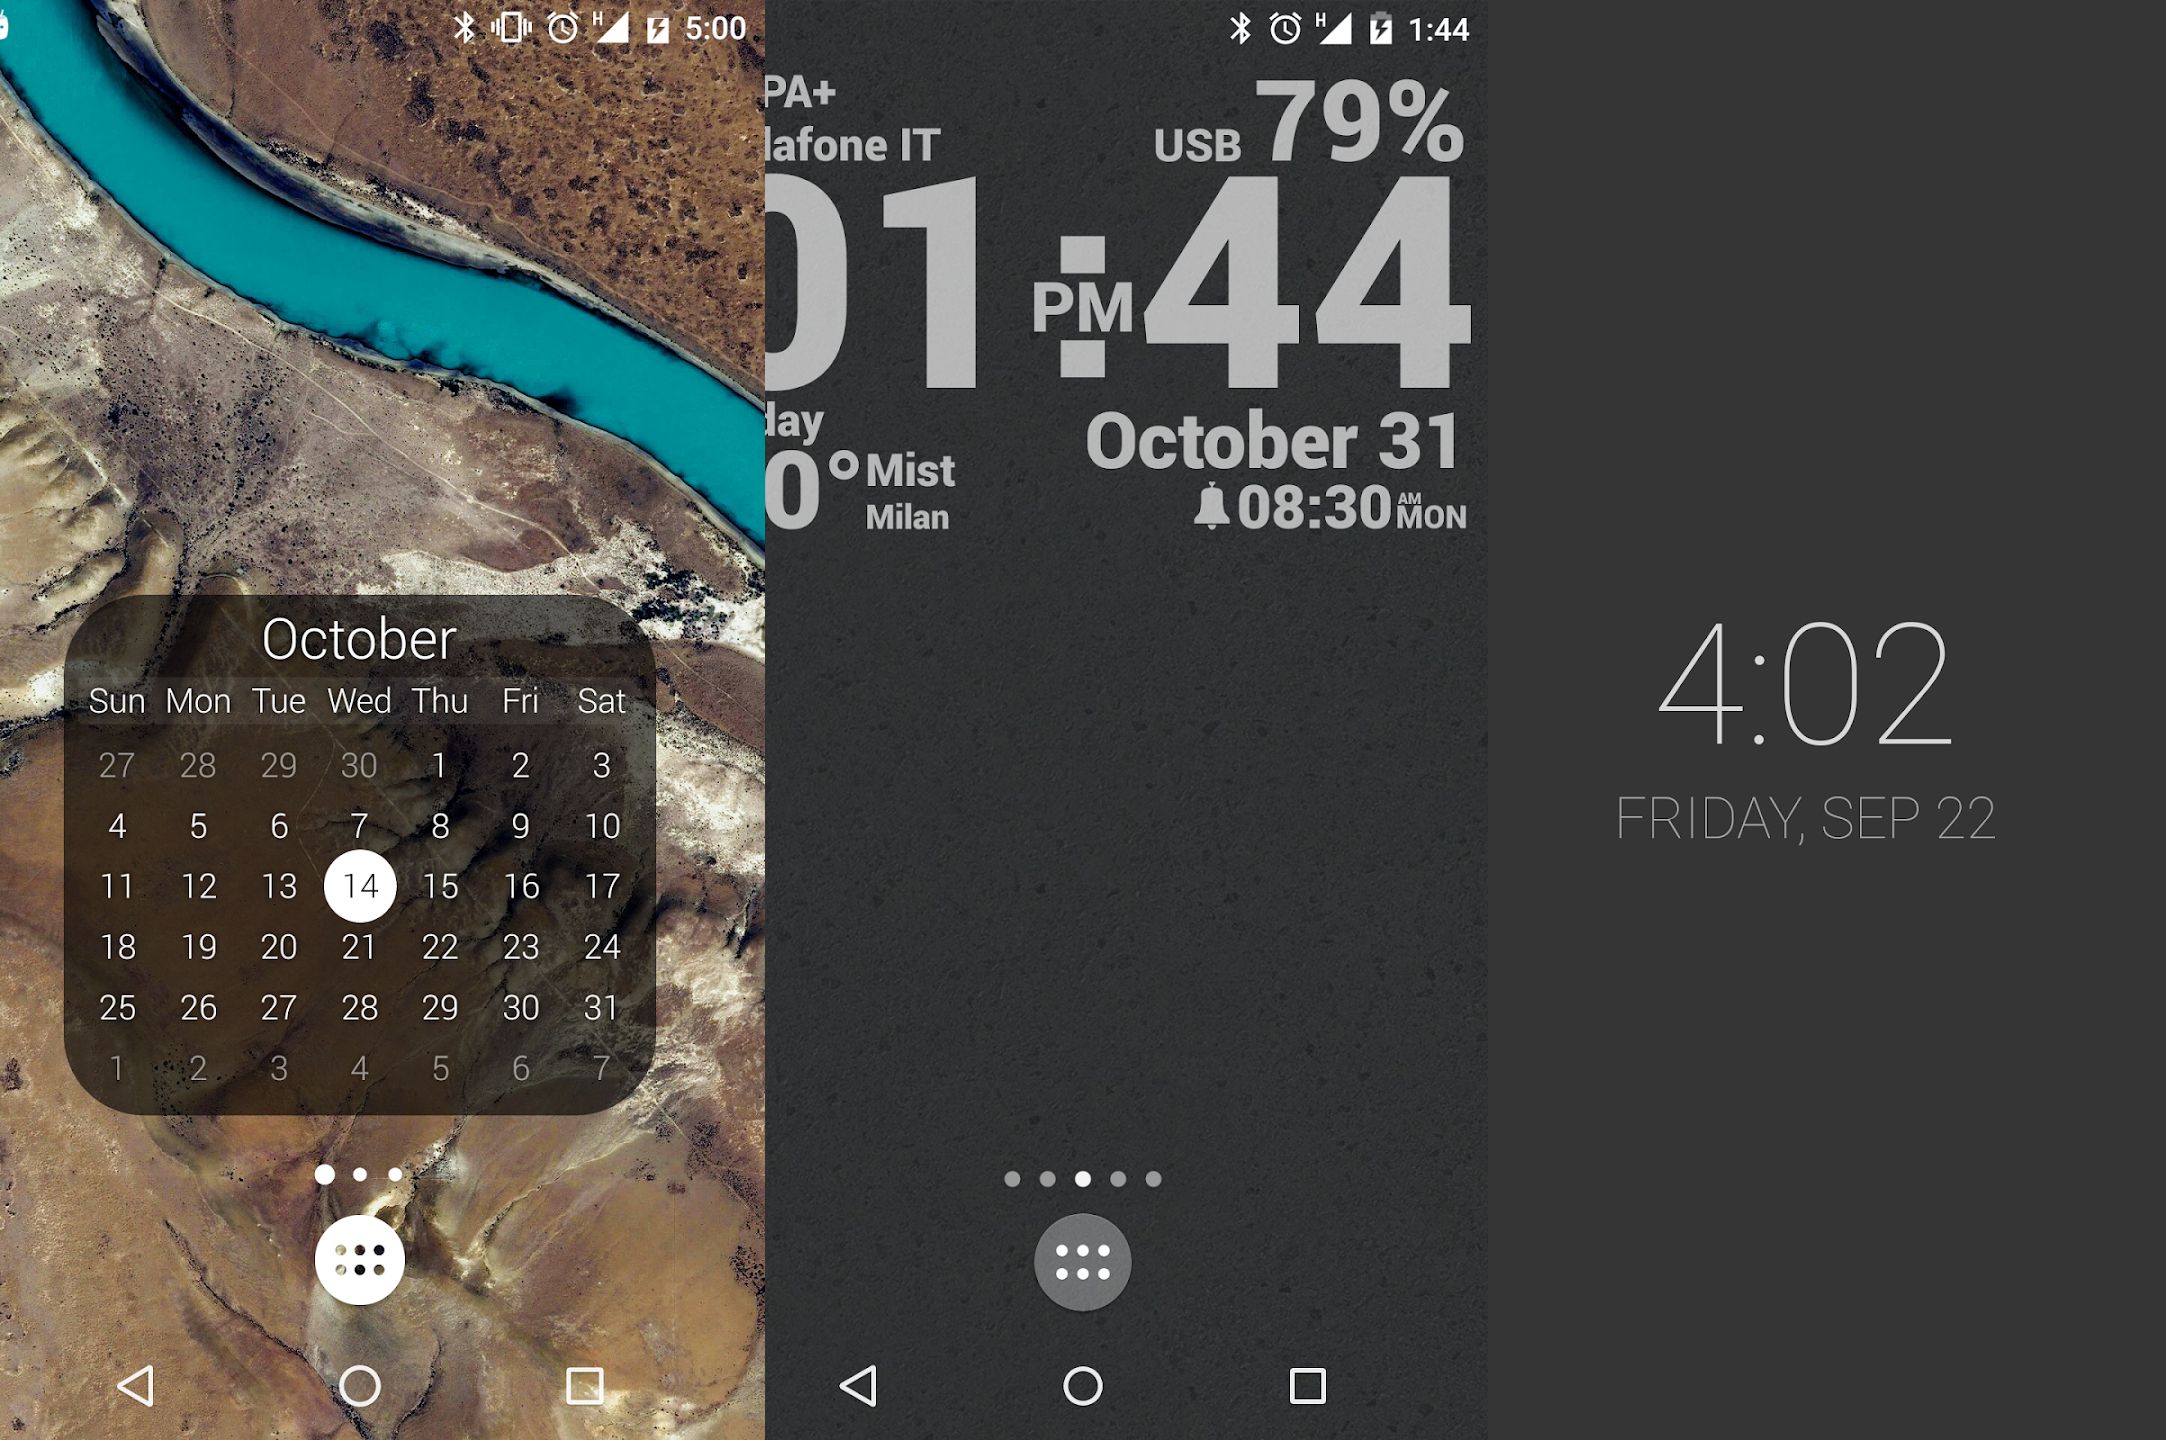 Kustom apps for Android